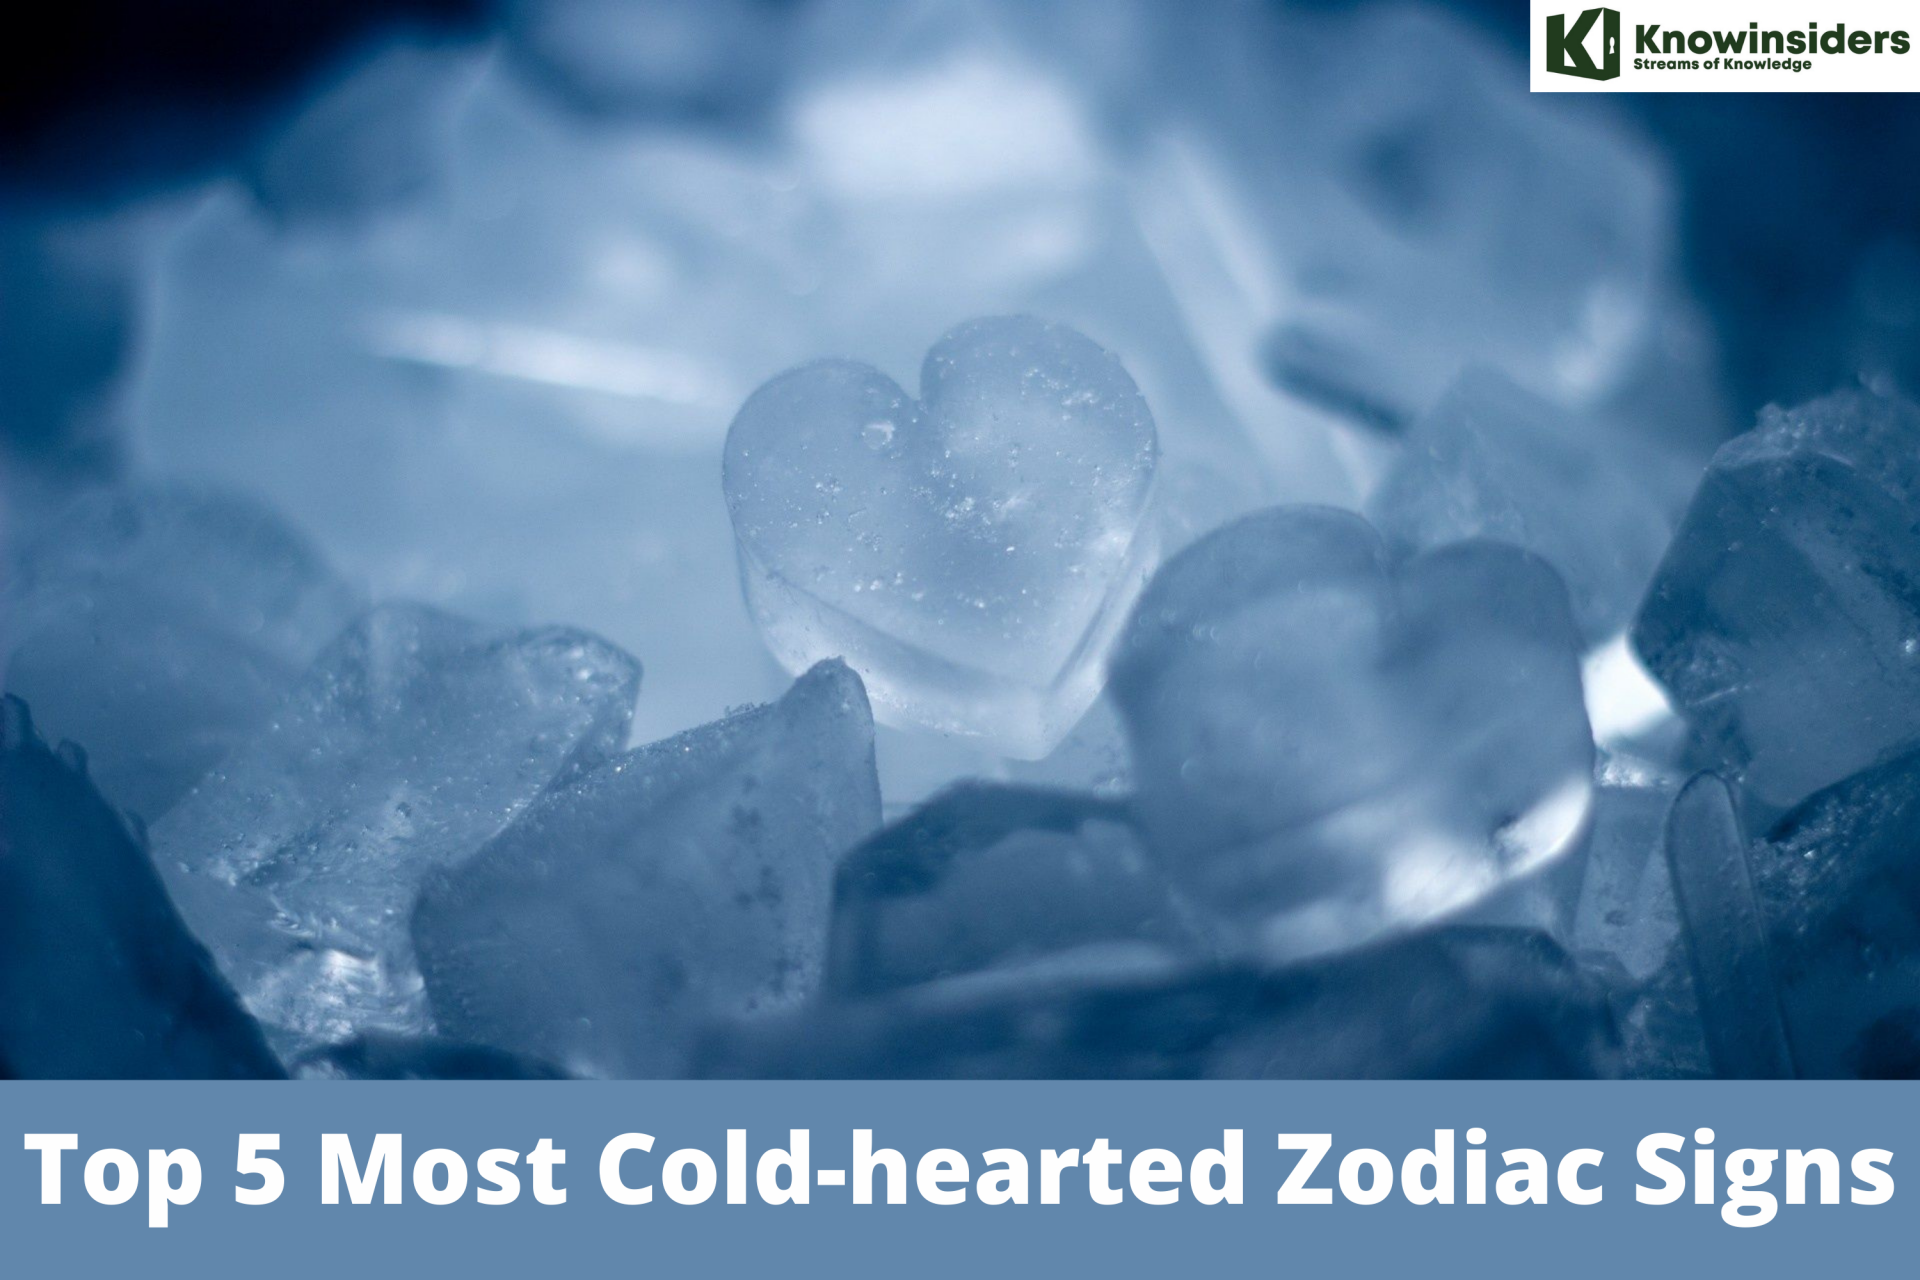 top 5 most cold hearted zodiac signs according to astrology